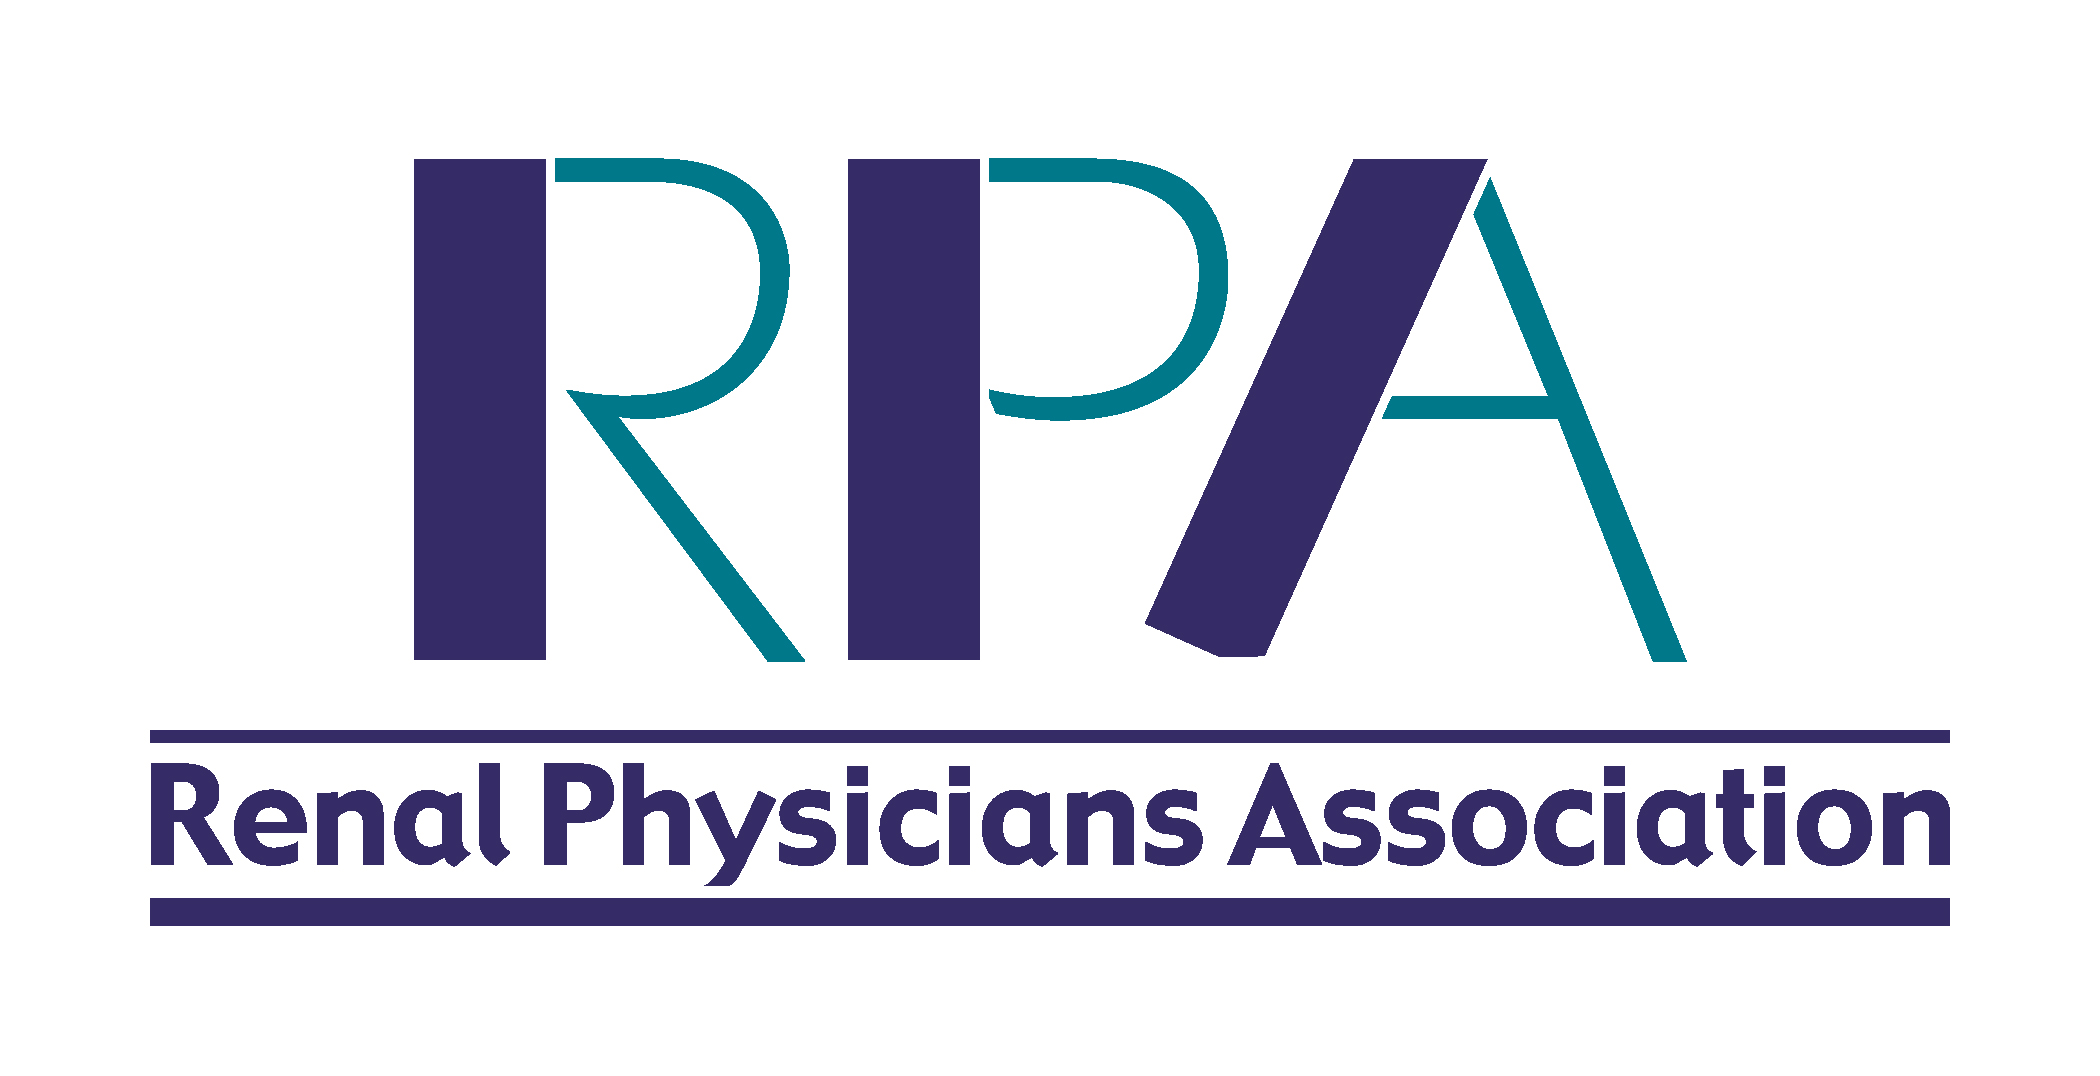 RPA 2023 - The Renal Physicians Association's Annual Meeting